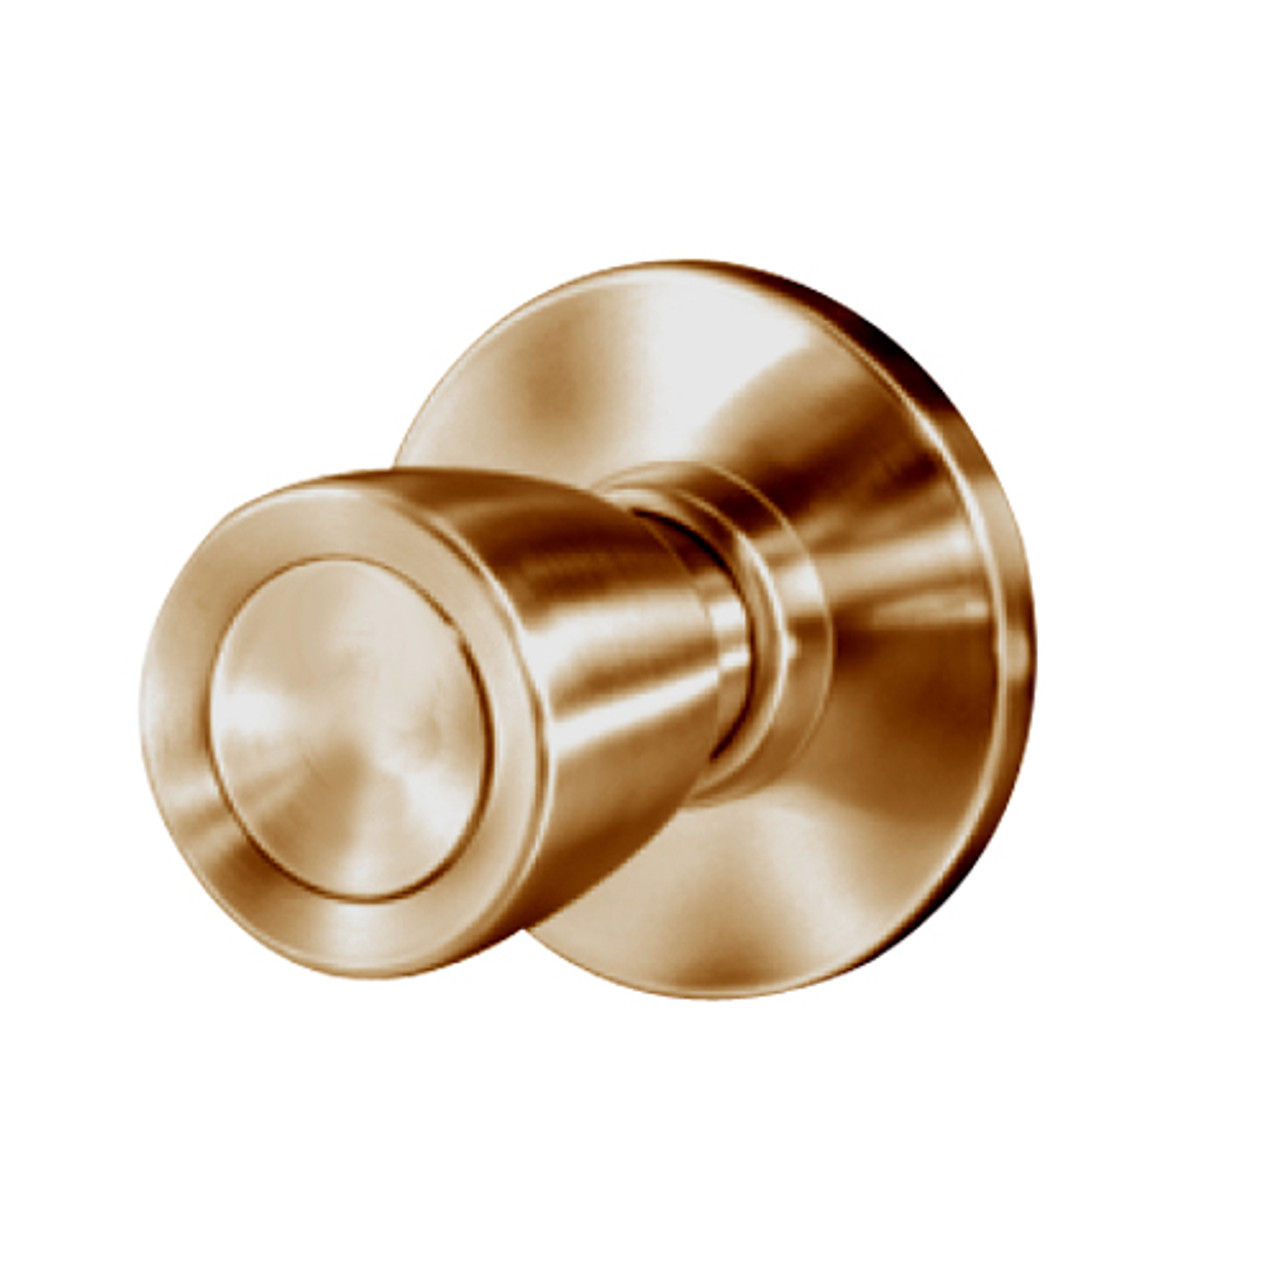 8K30NX6AS3612 Best 8K Series Exit Heavy Duty Cylindrical Knob Locks with Tulip Style in Satin Bronze